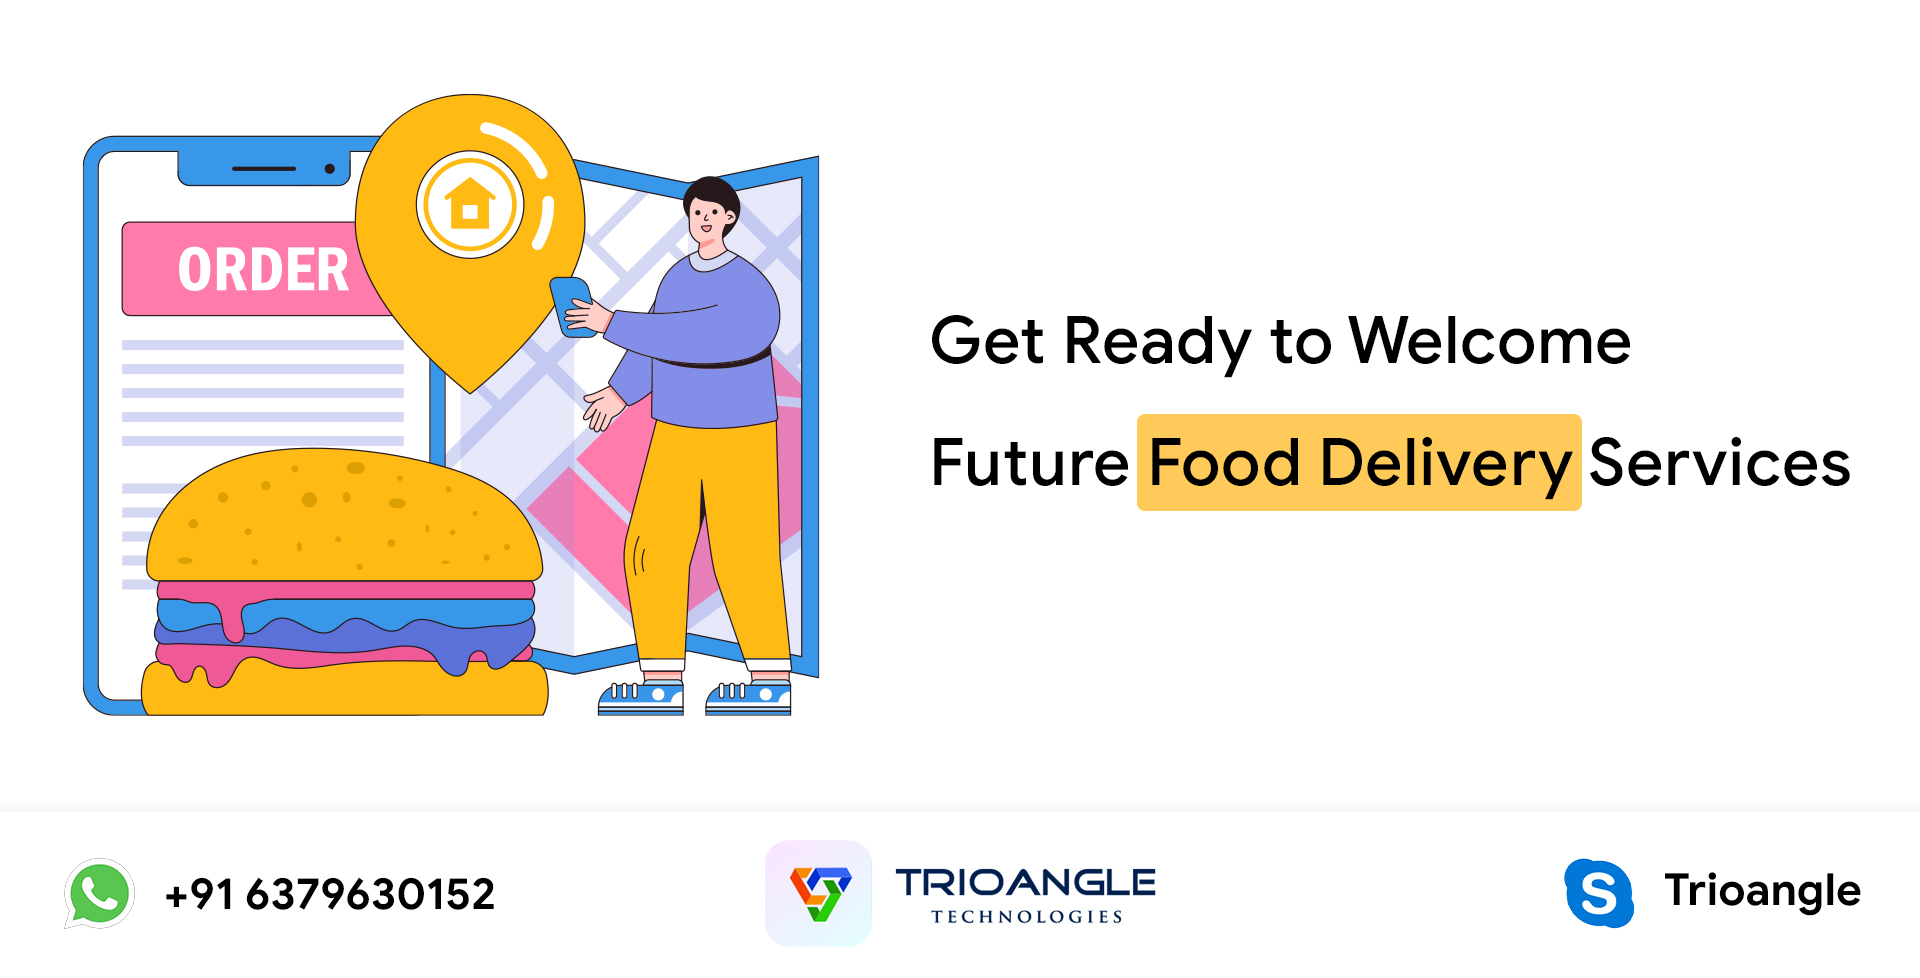 Get Ready to Welcome Future Food Delivery Services